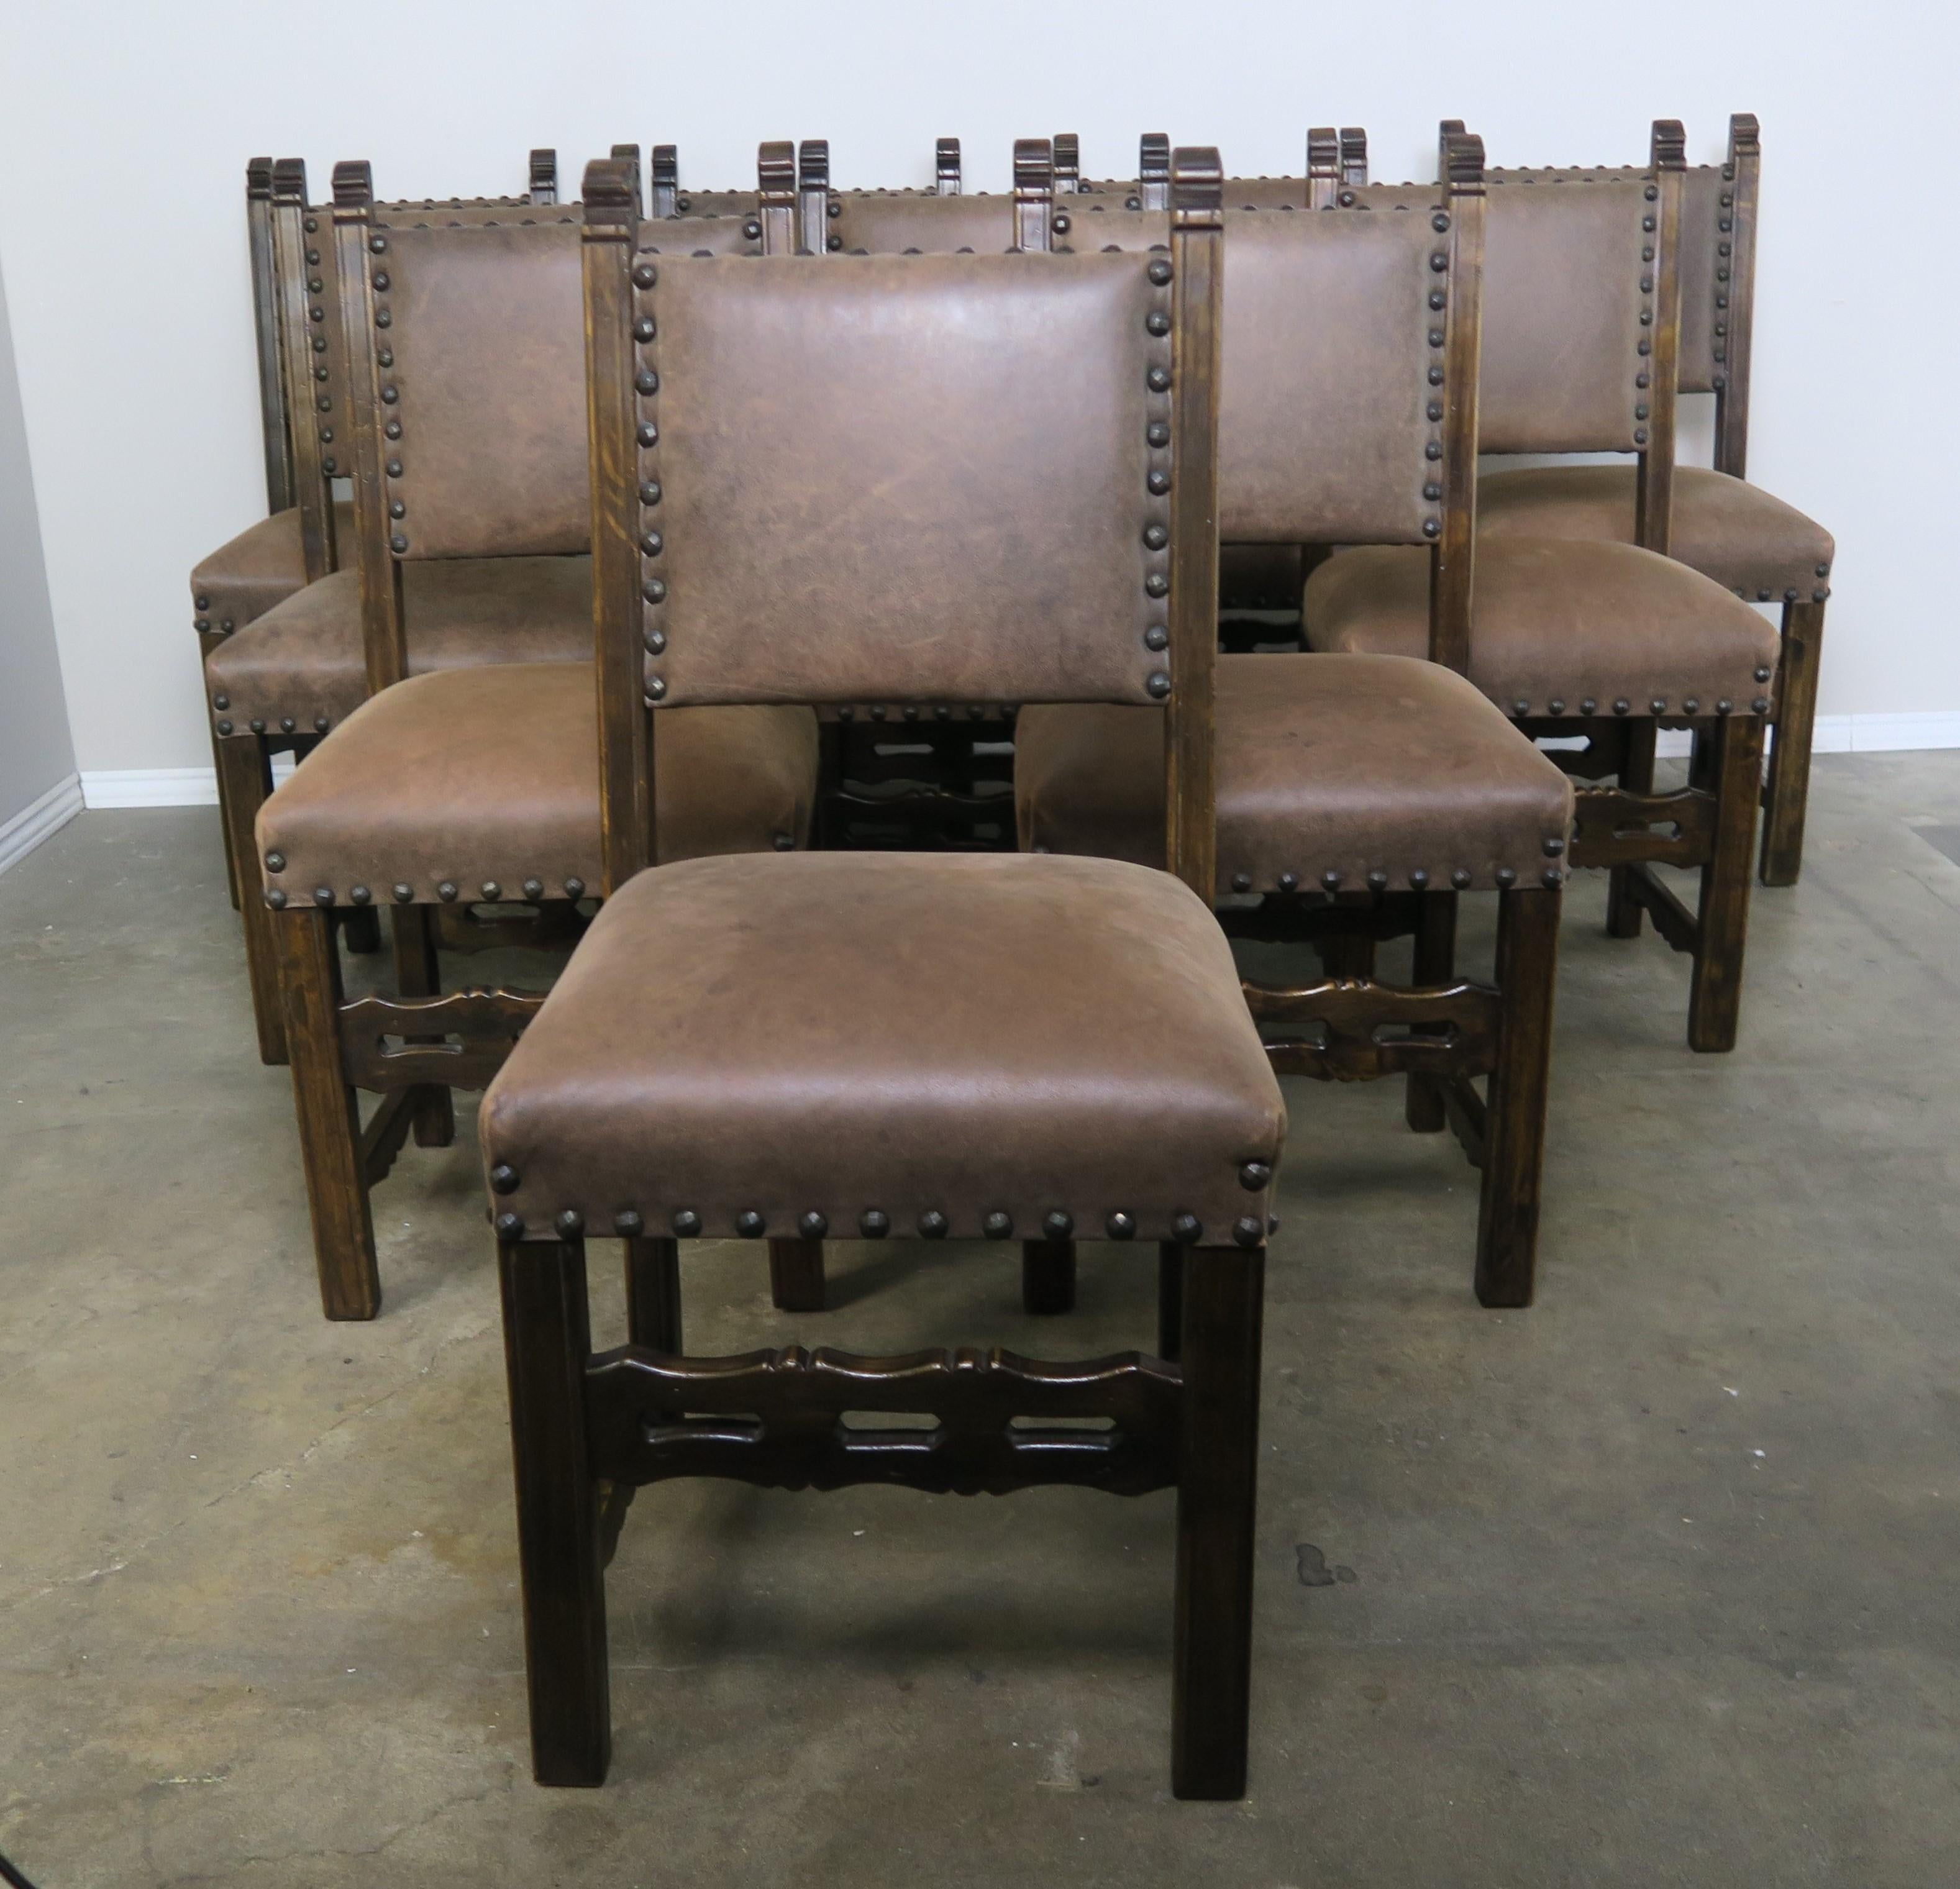 Set of ten Spanish style dining side chairs upholstered in brown leather with nailhead trim detail.
Measures: seat height 22